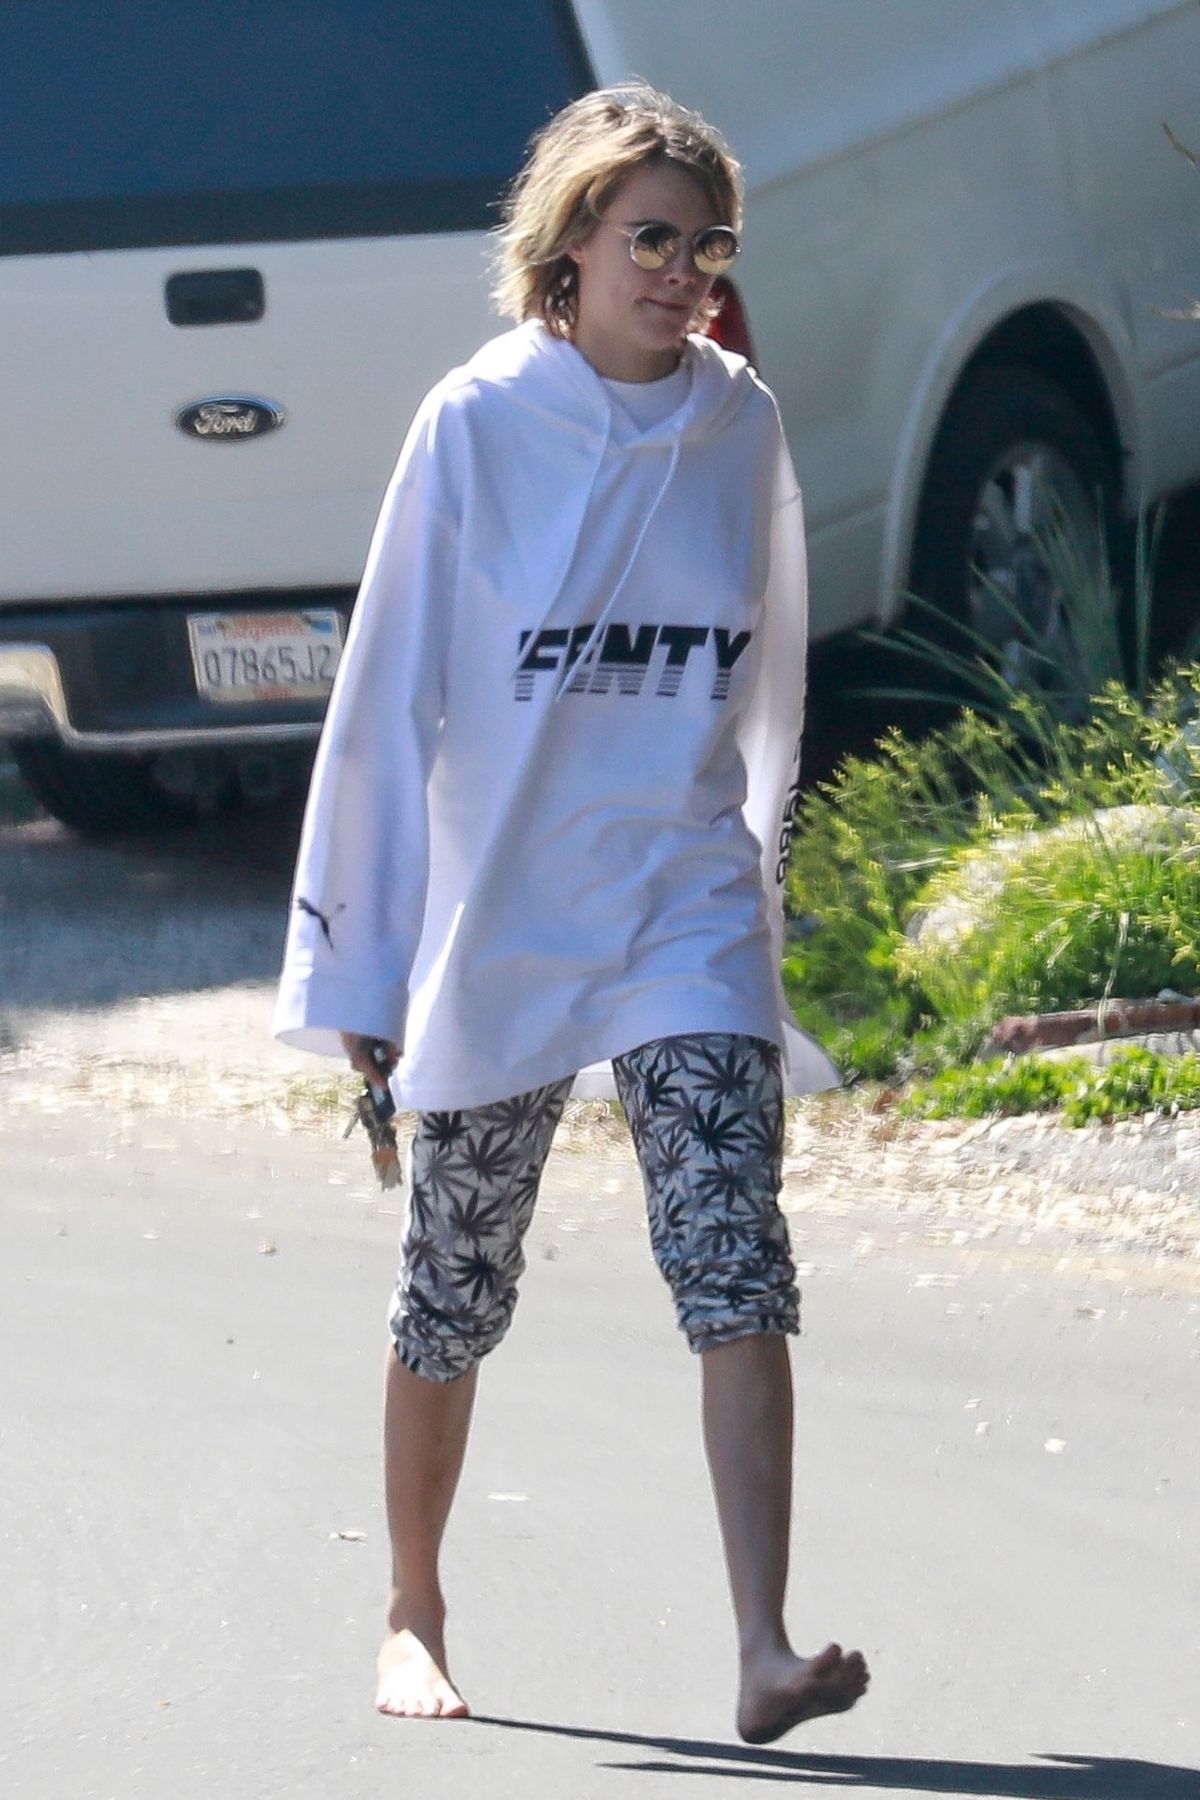 cara-delevingne-out-and-about-in-los-angeles-03-15-2019-3.jpg